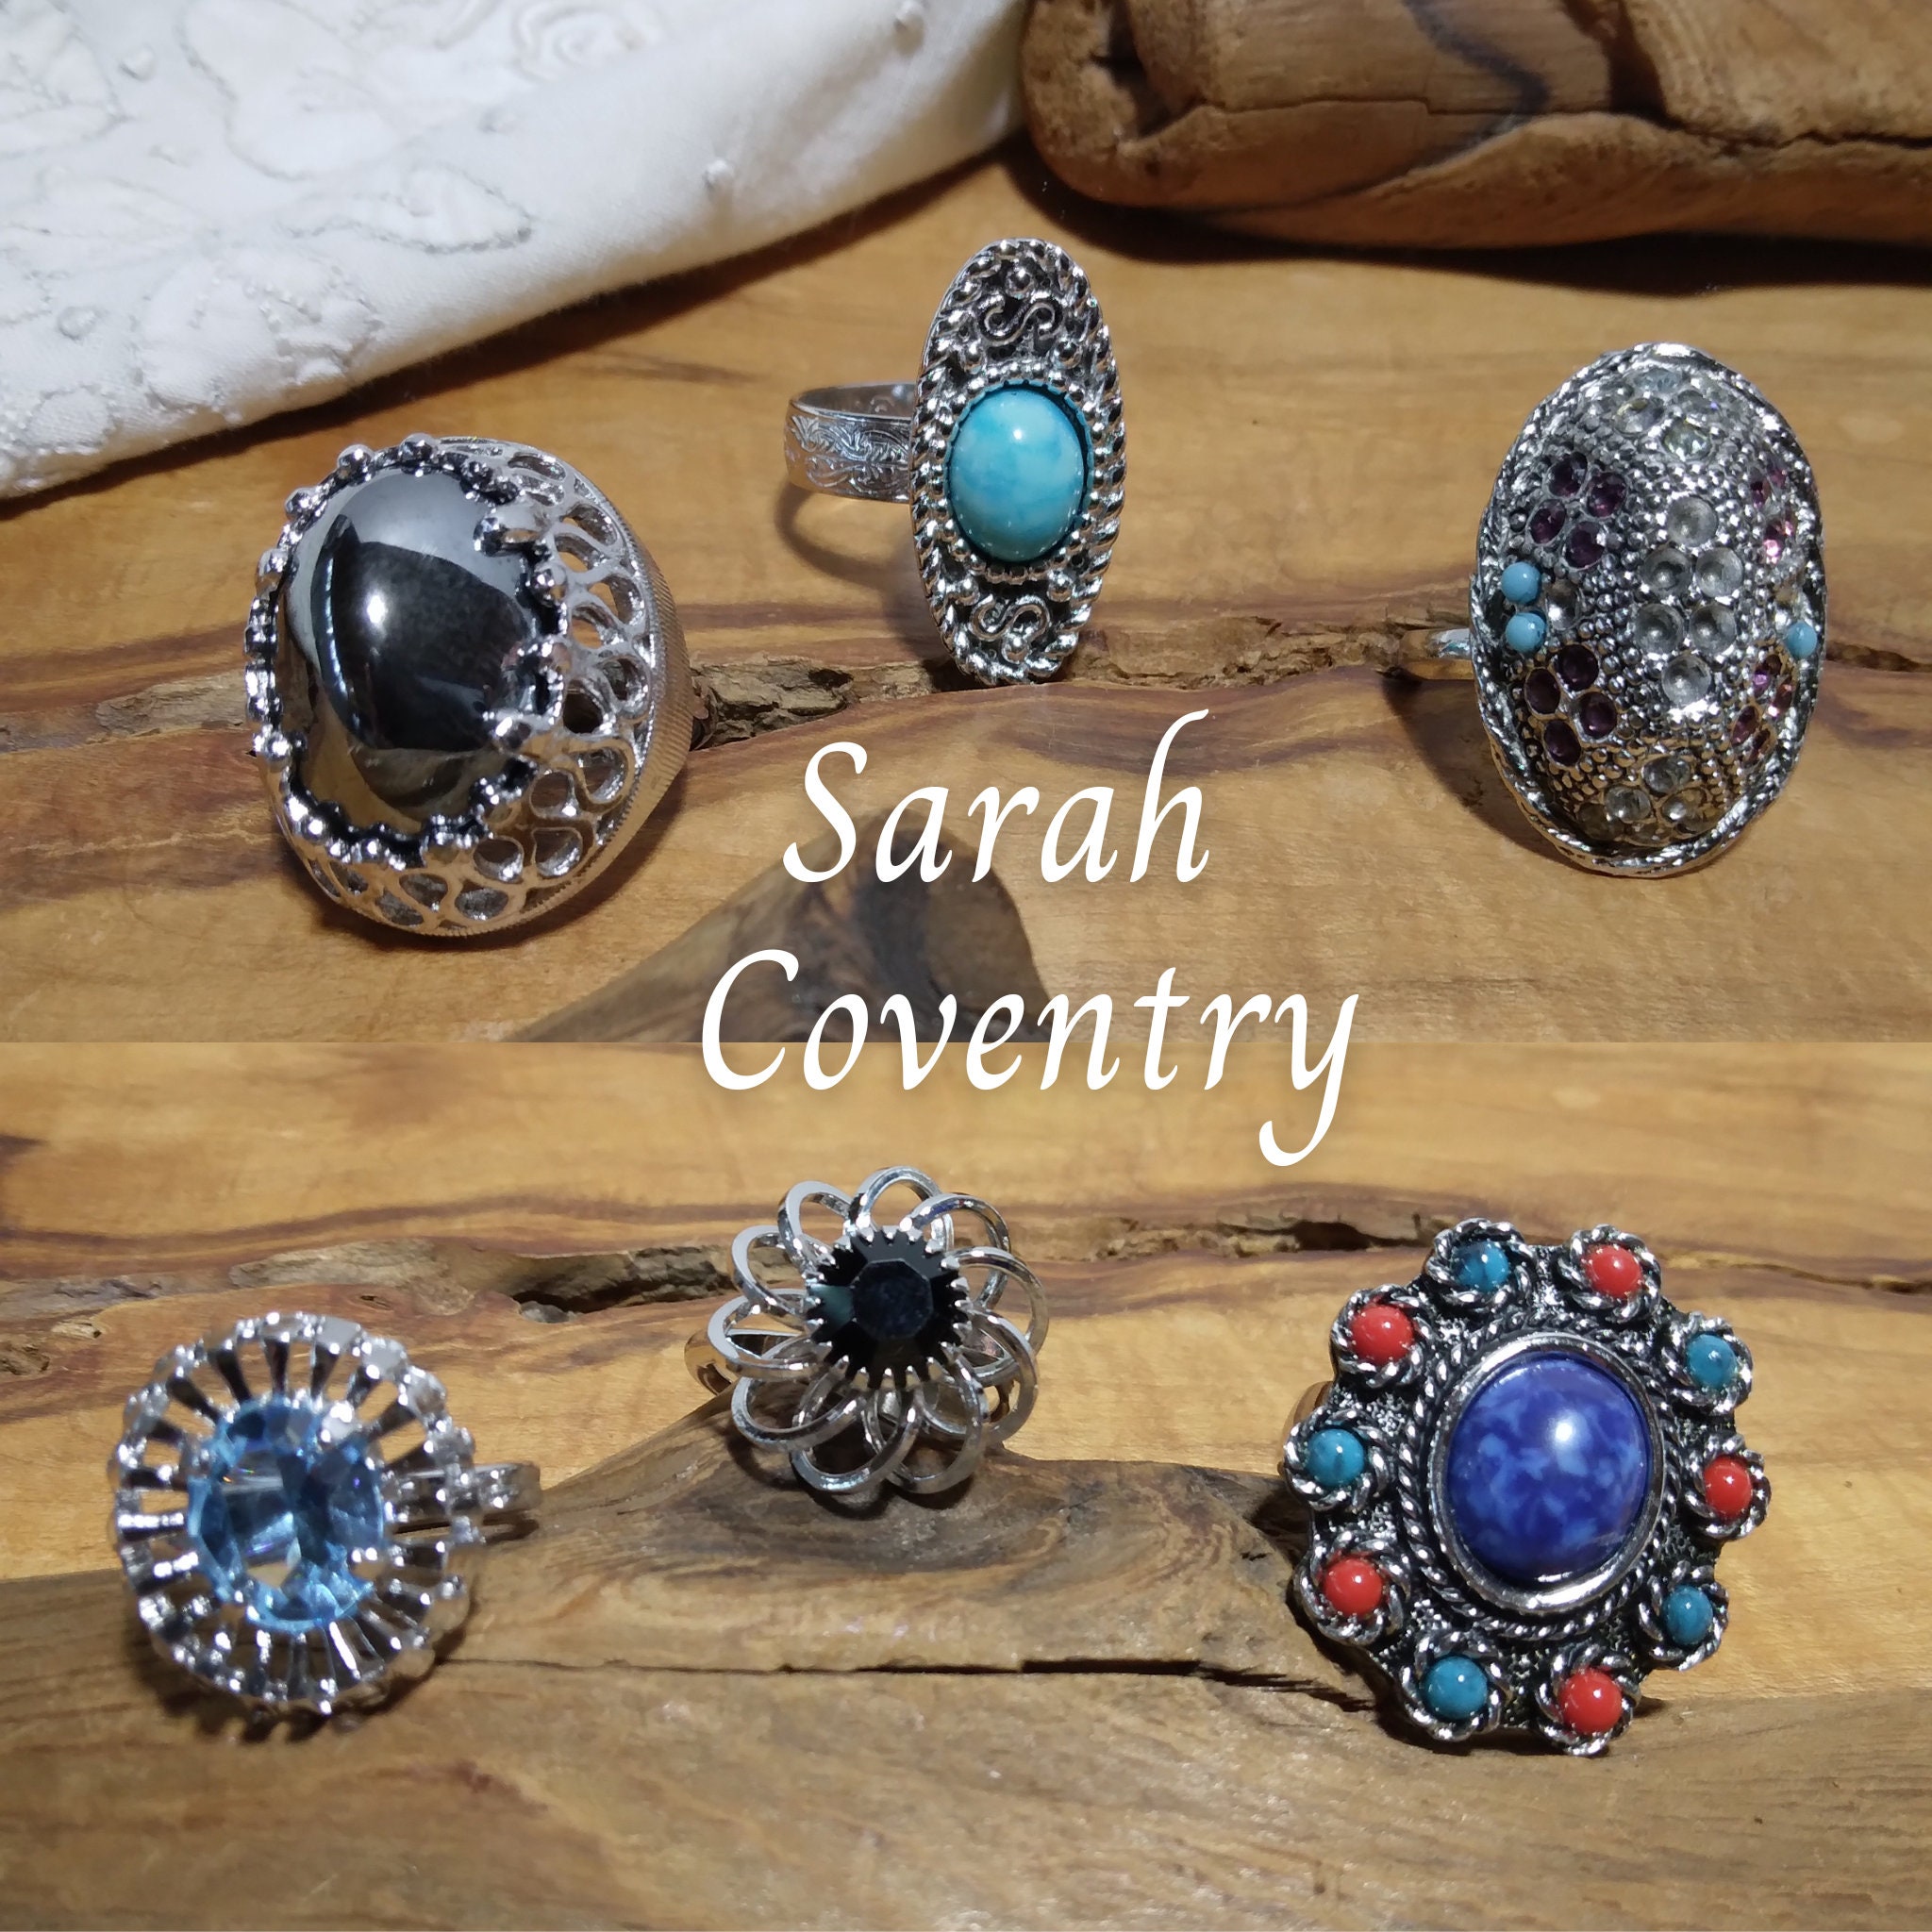 Sarah Coventry Statement Rings Your Choice of Vintage 1970s Silver Tone  Statement Jewelry Adjustable One Size Fits Most 